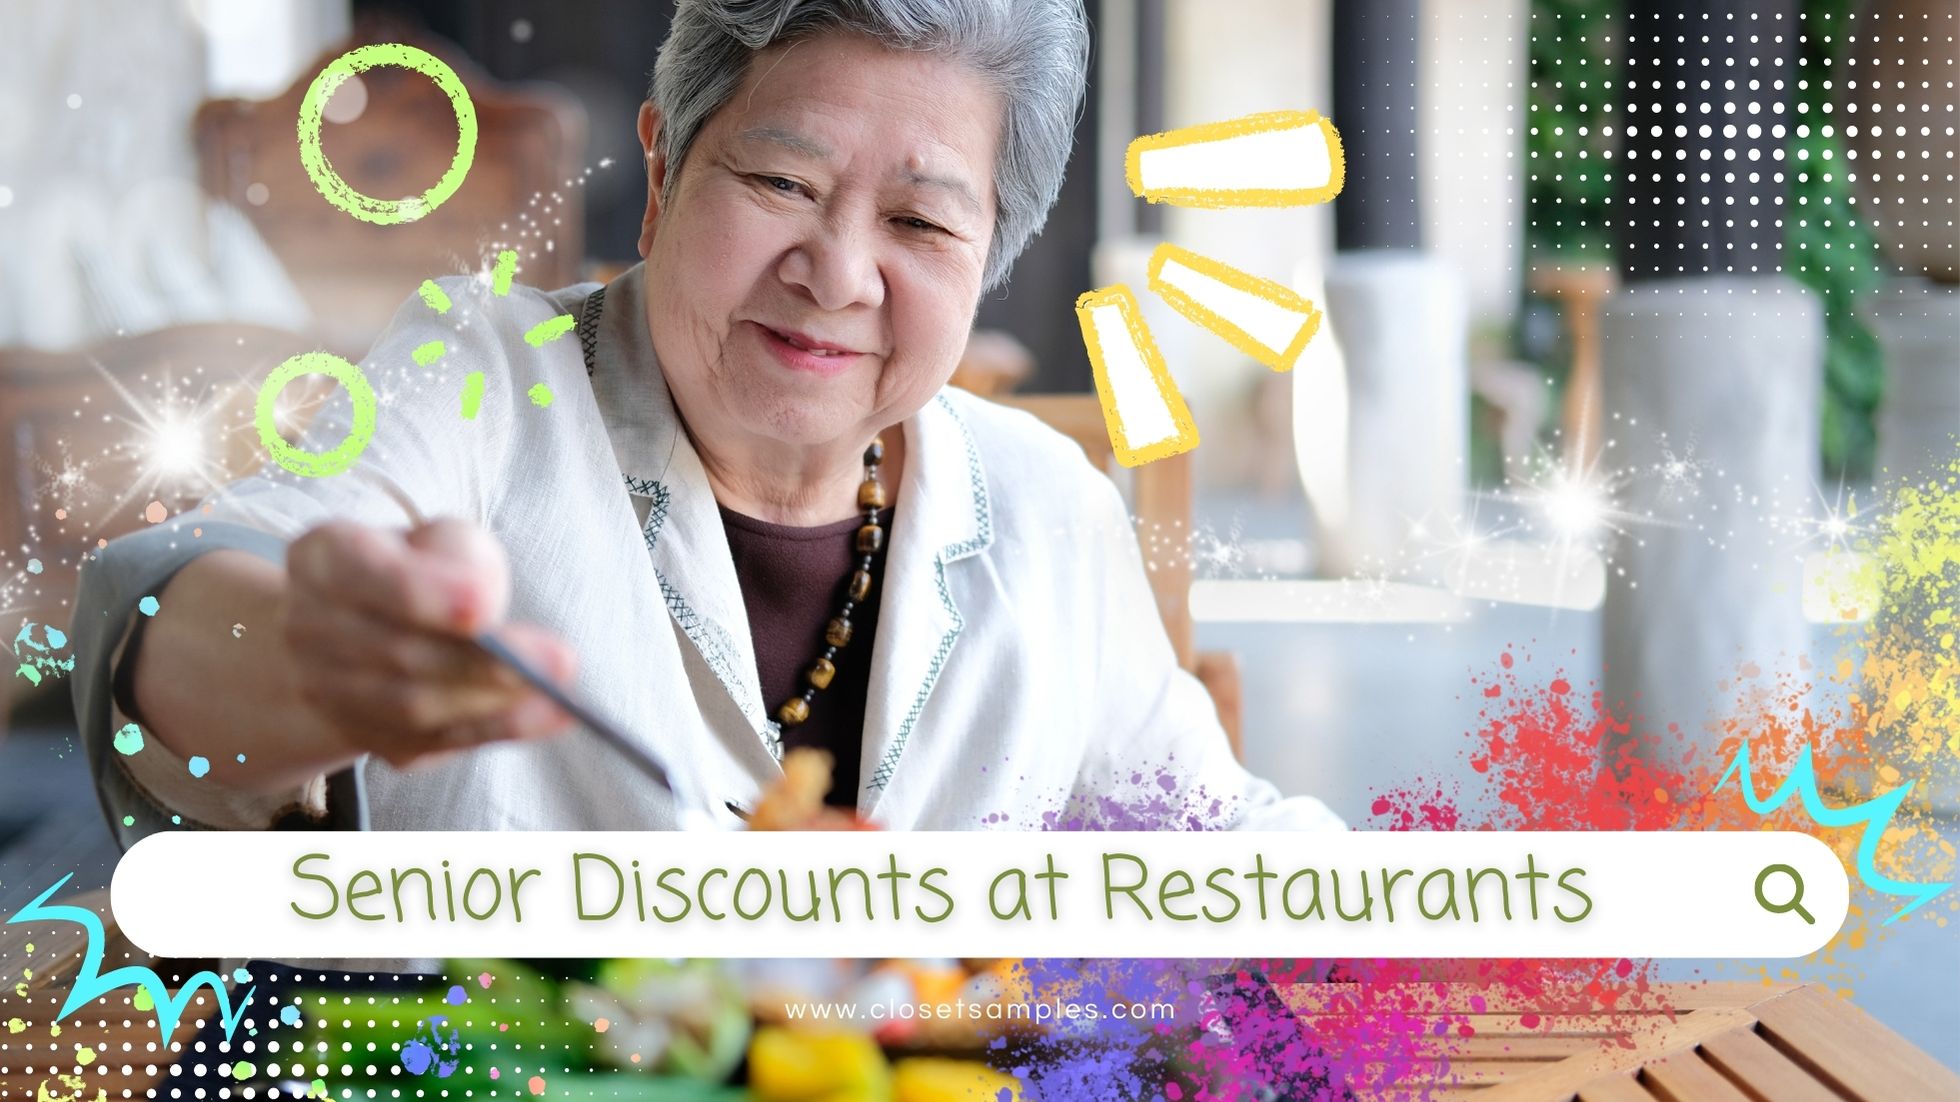 The Ultimate Guide to Senior Citizen Discounts and Savings in 2023 Restaurants